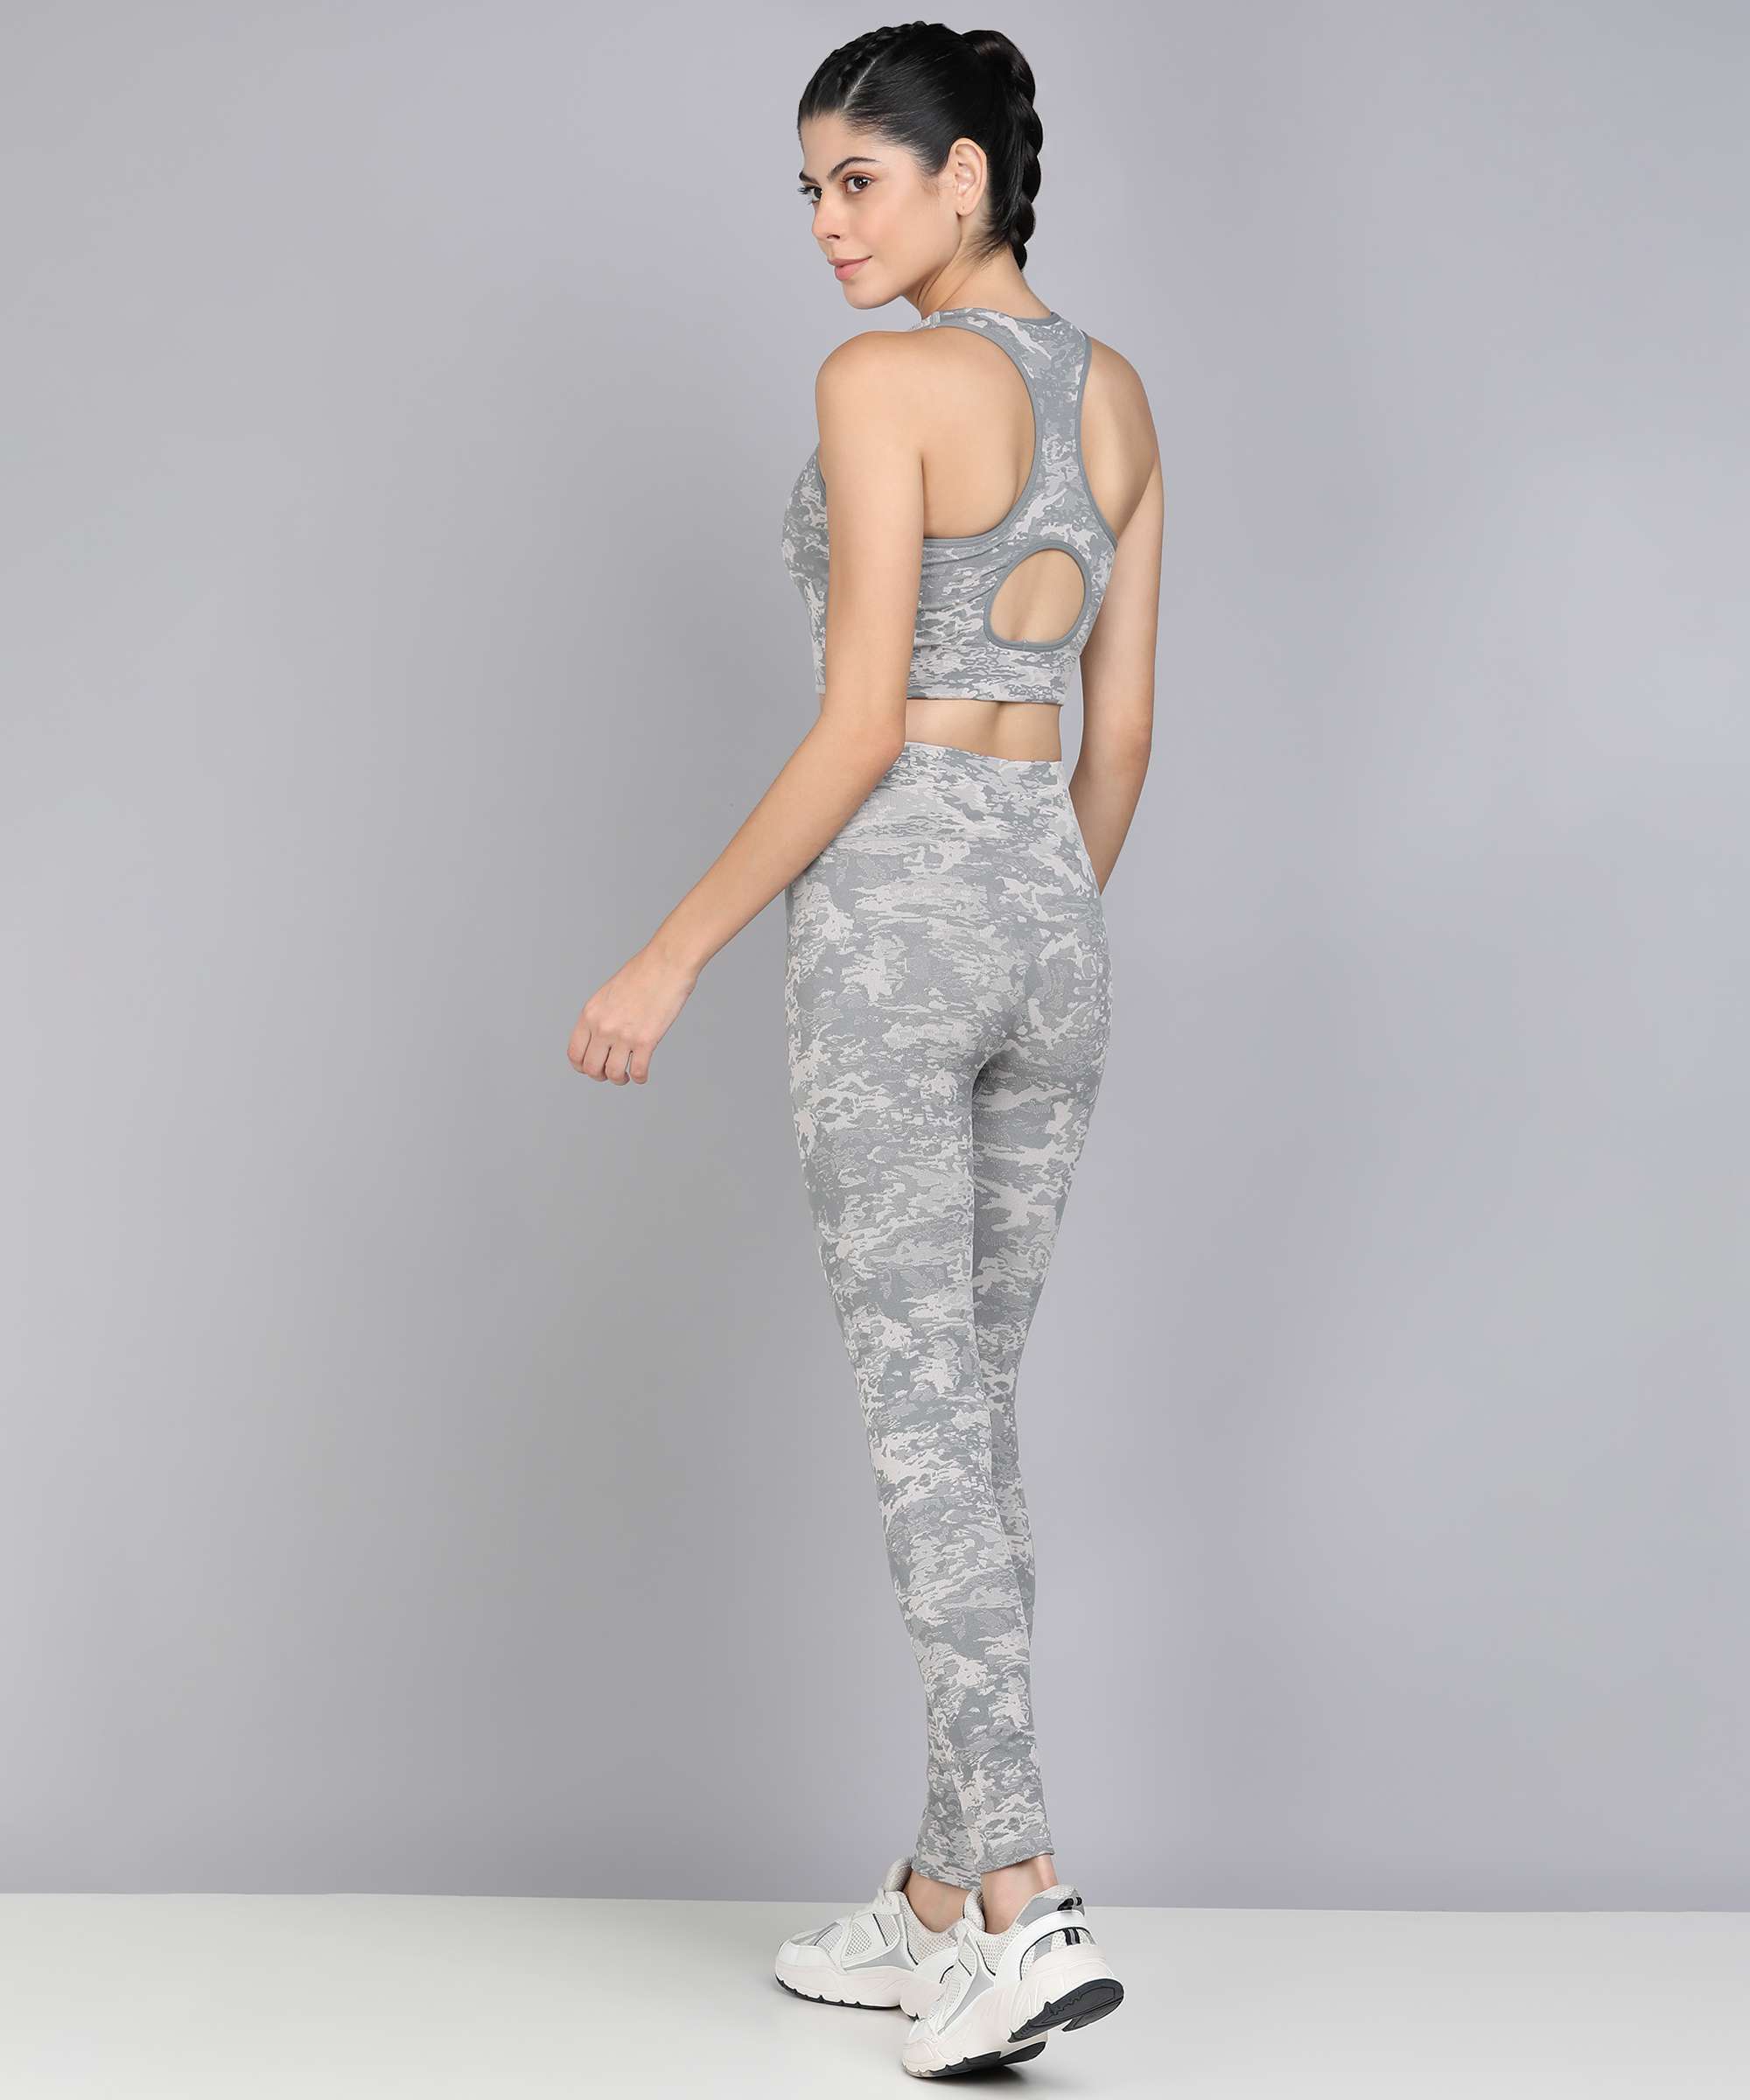 Seamless Camo Leggings - KOBO SPORTS - Exclusively Designed for Workouts